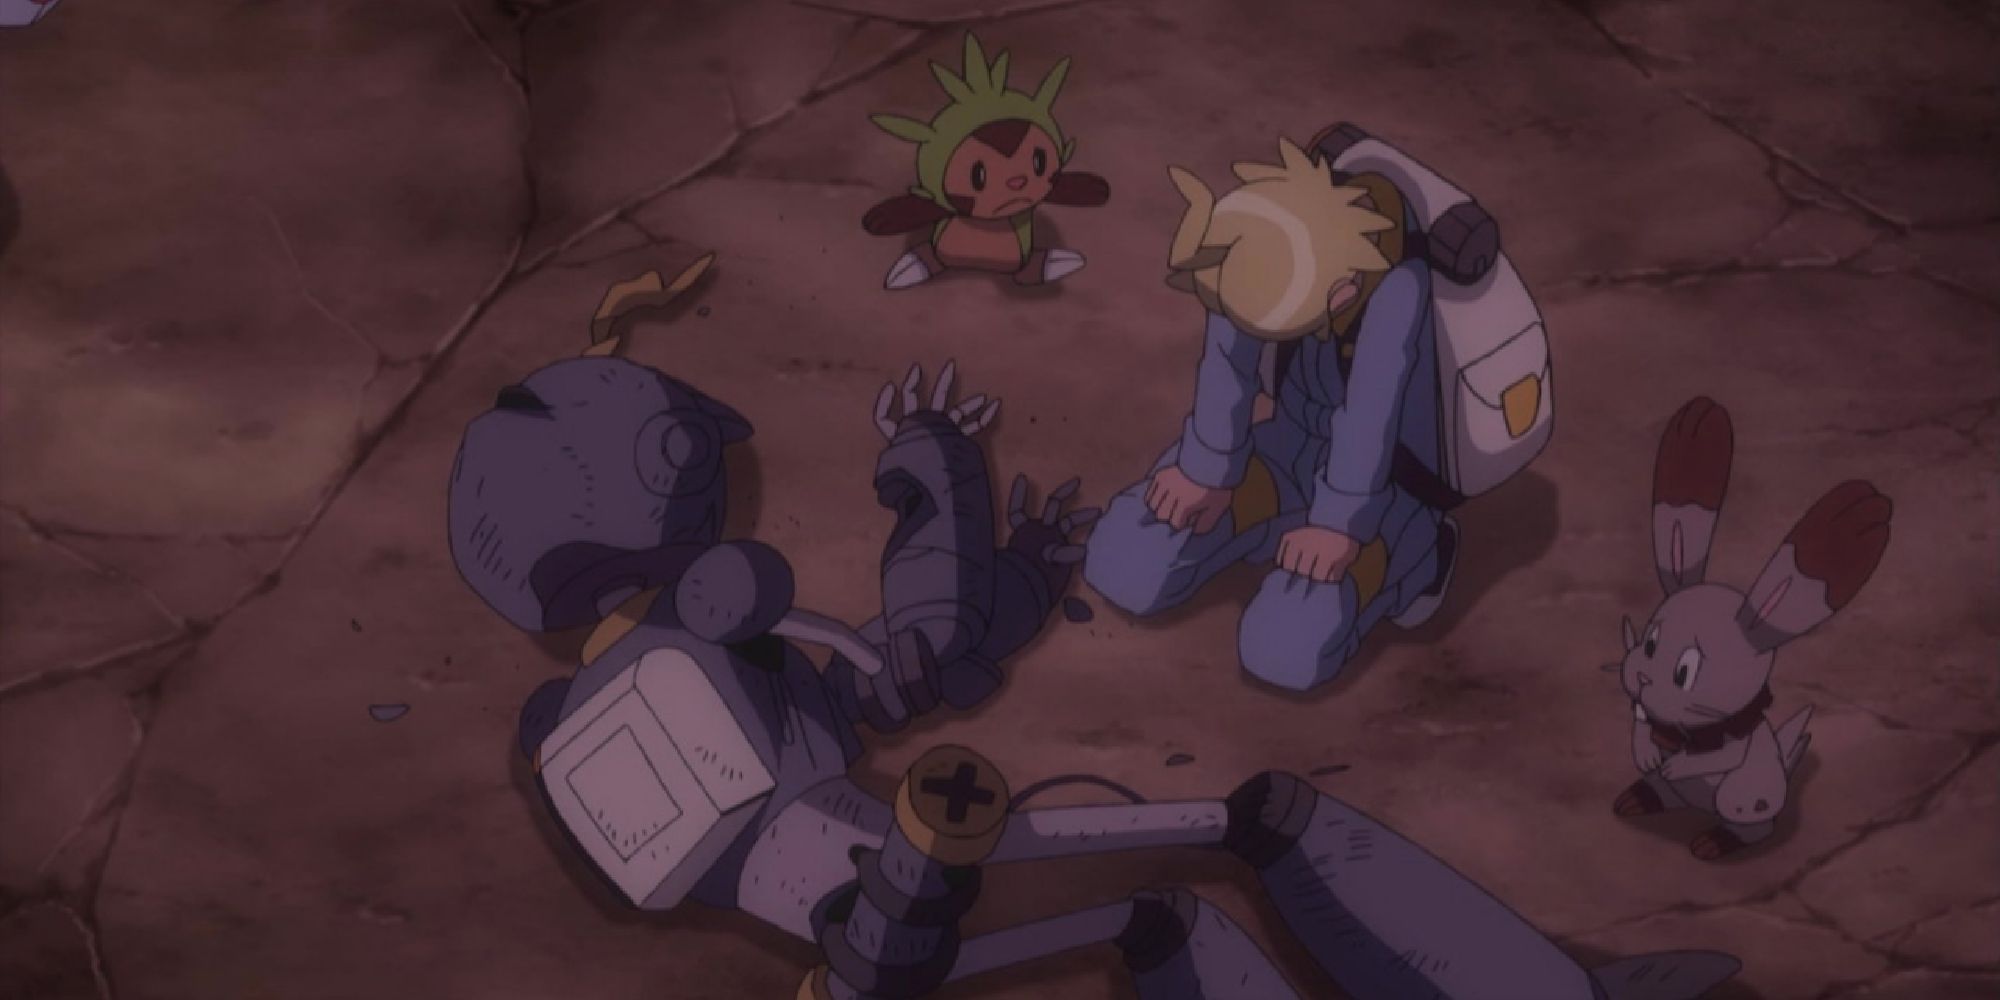 Clemont mourning the fallen Clembot with Chespin and Bunnelby